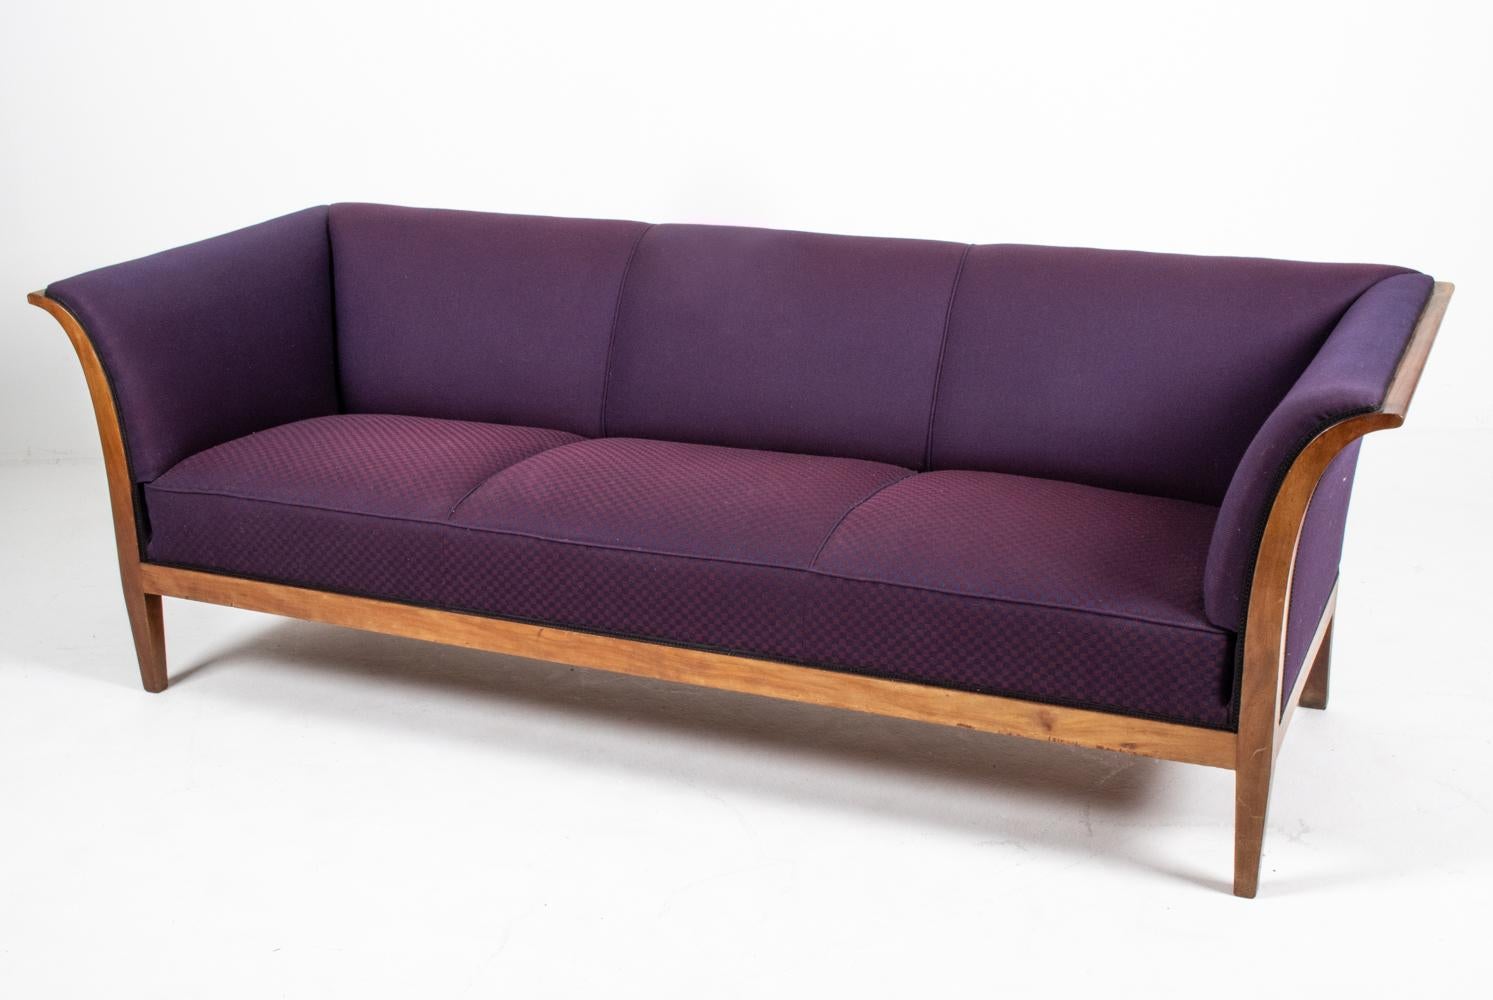 A handsome Danish mid-century three-seater sofa, designed by furniture maker and designer Frits Henningsen (1889–1965), c. 1940's. Both the proprietor of a furniture-making workshop with a team of cabinetmakers in central Copenhagen as well as the